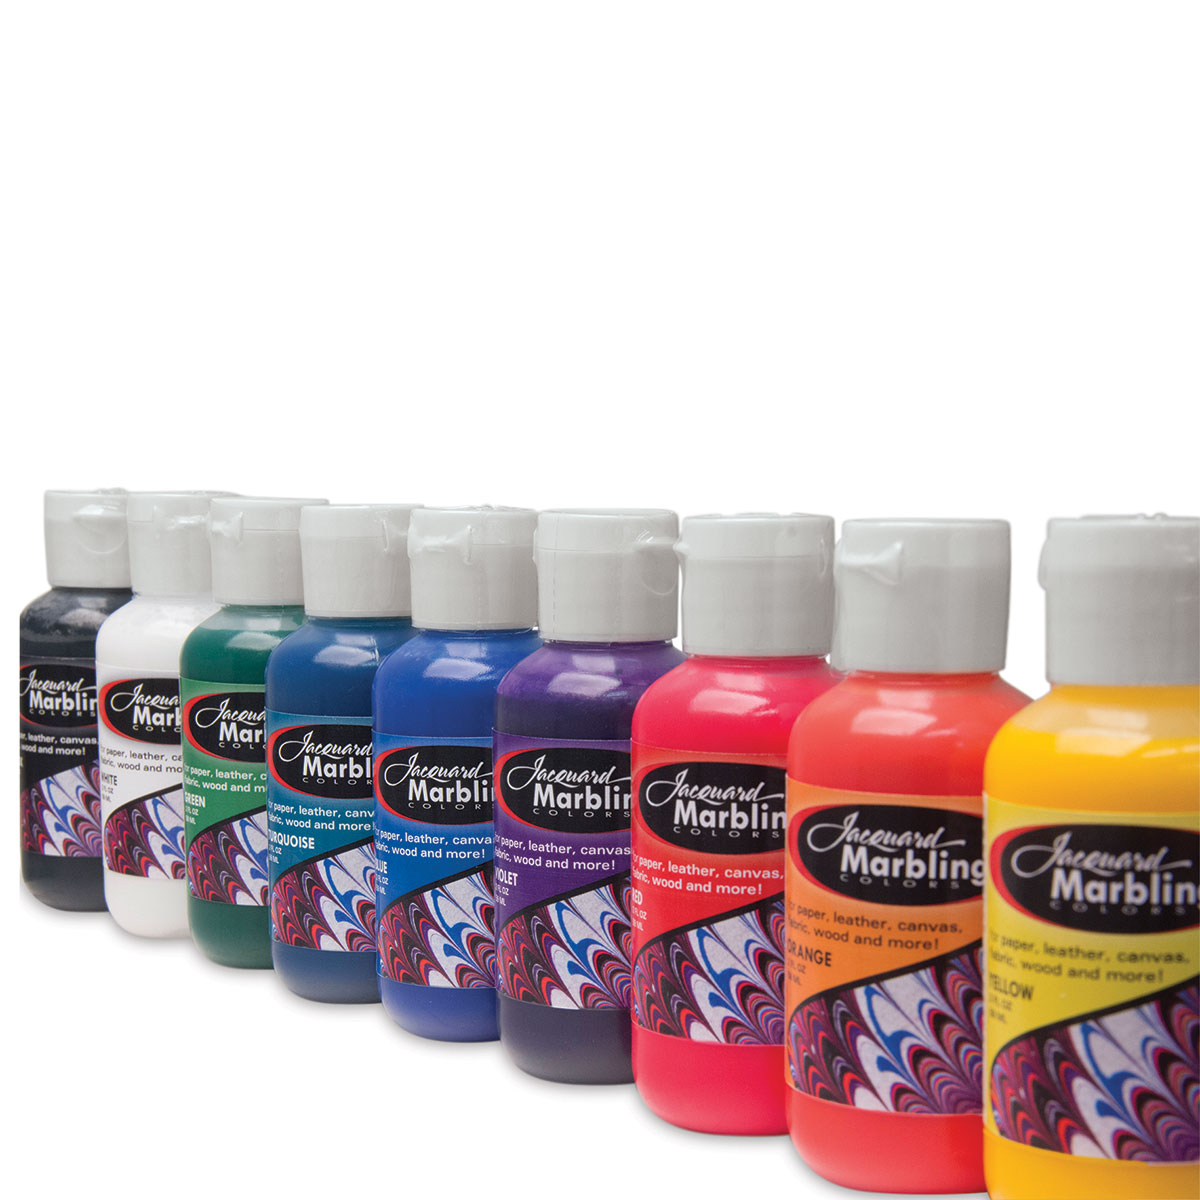 36 Piece Marbling Painting Kit for Kids, Arts and Crafts Supplies